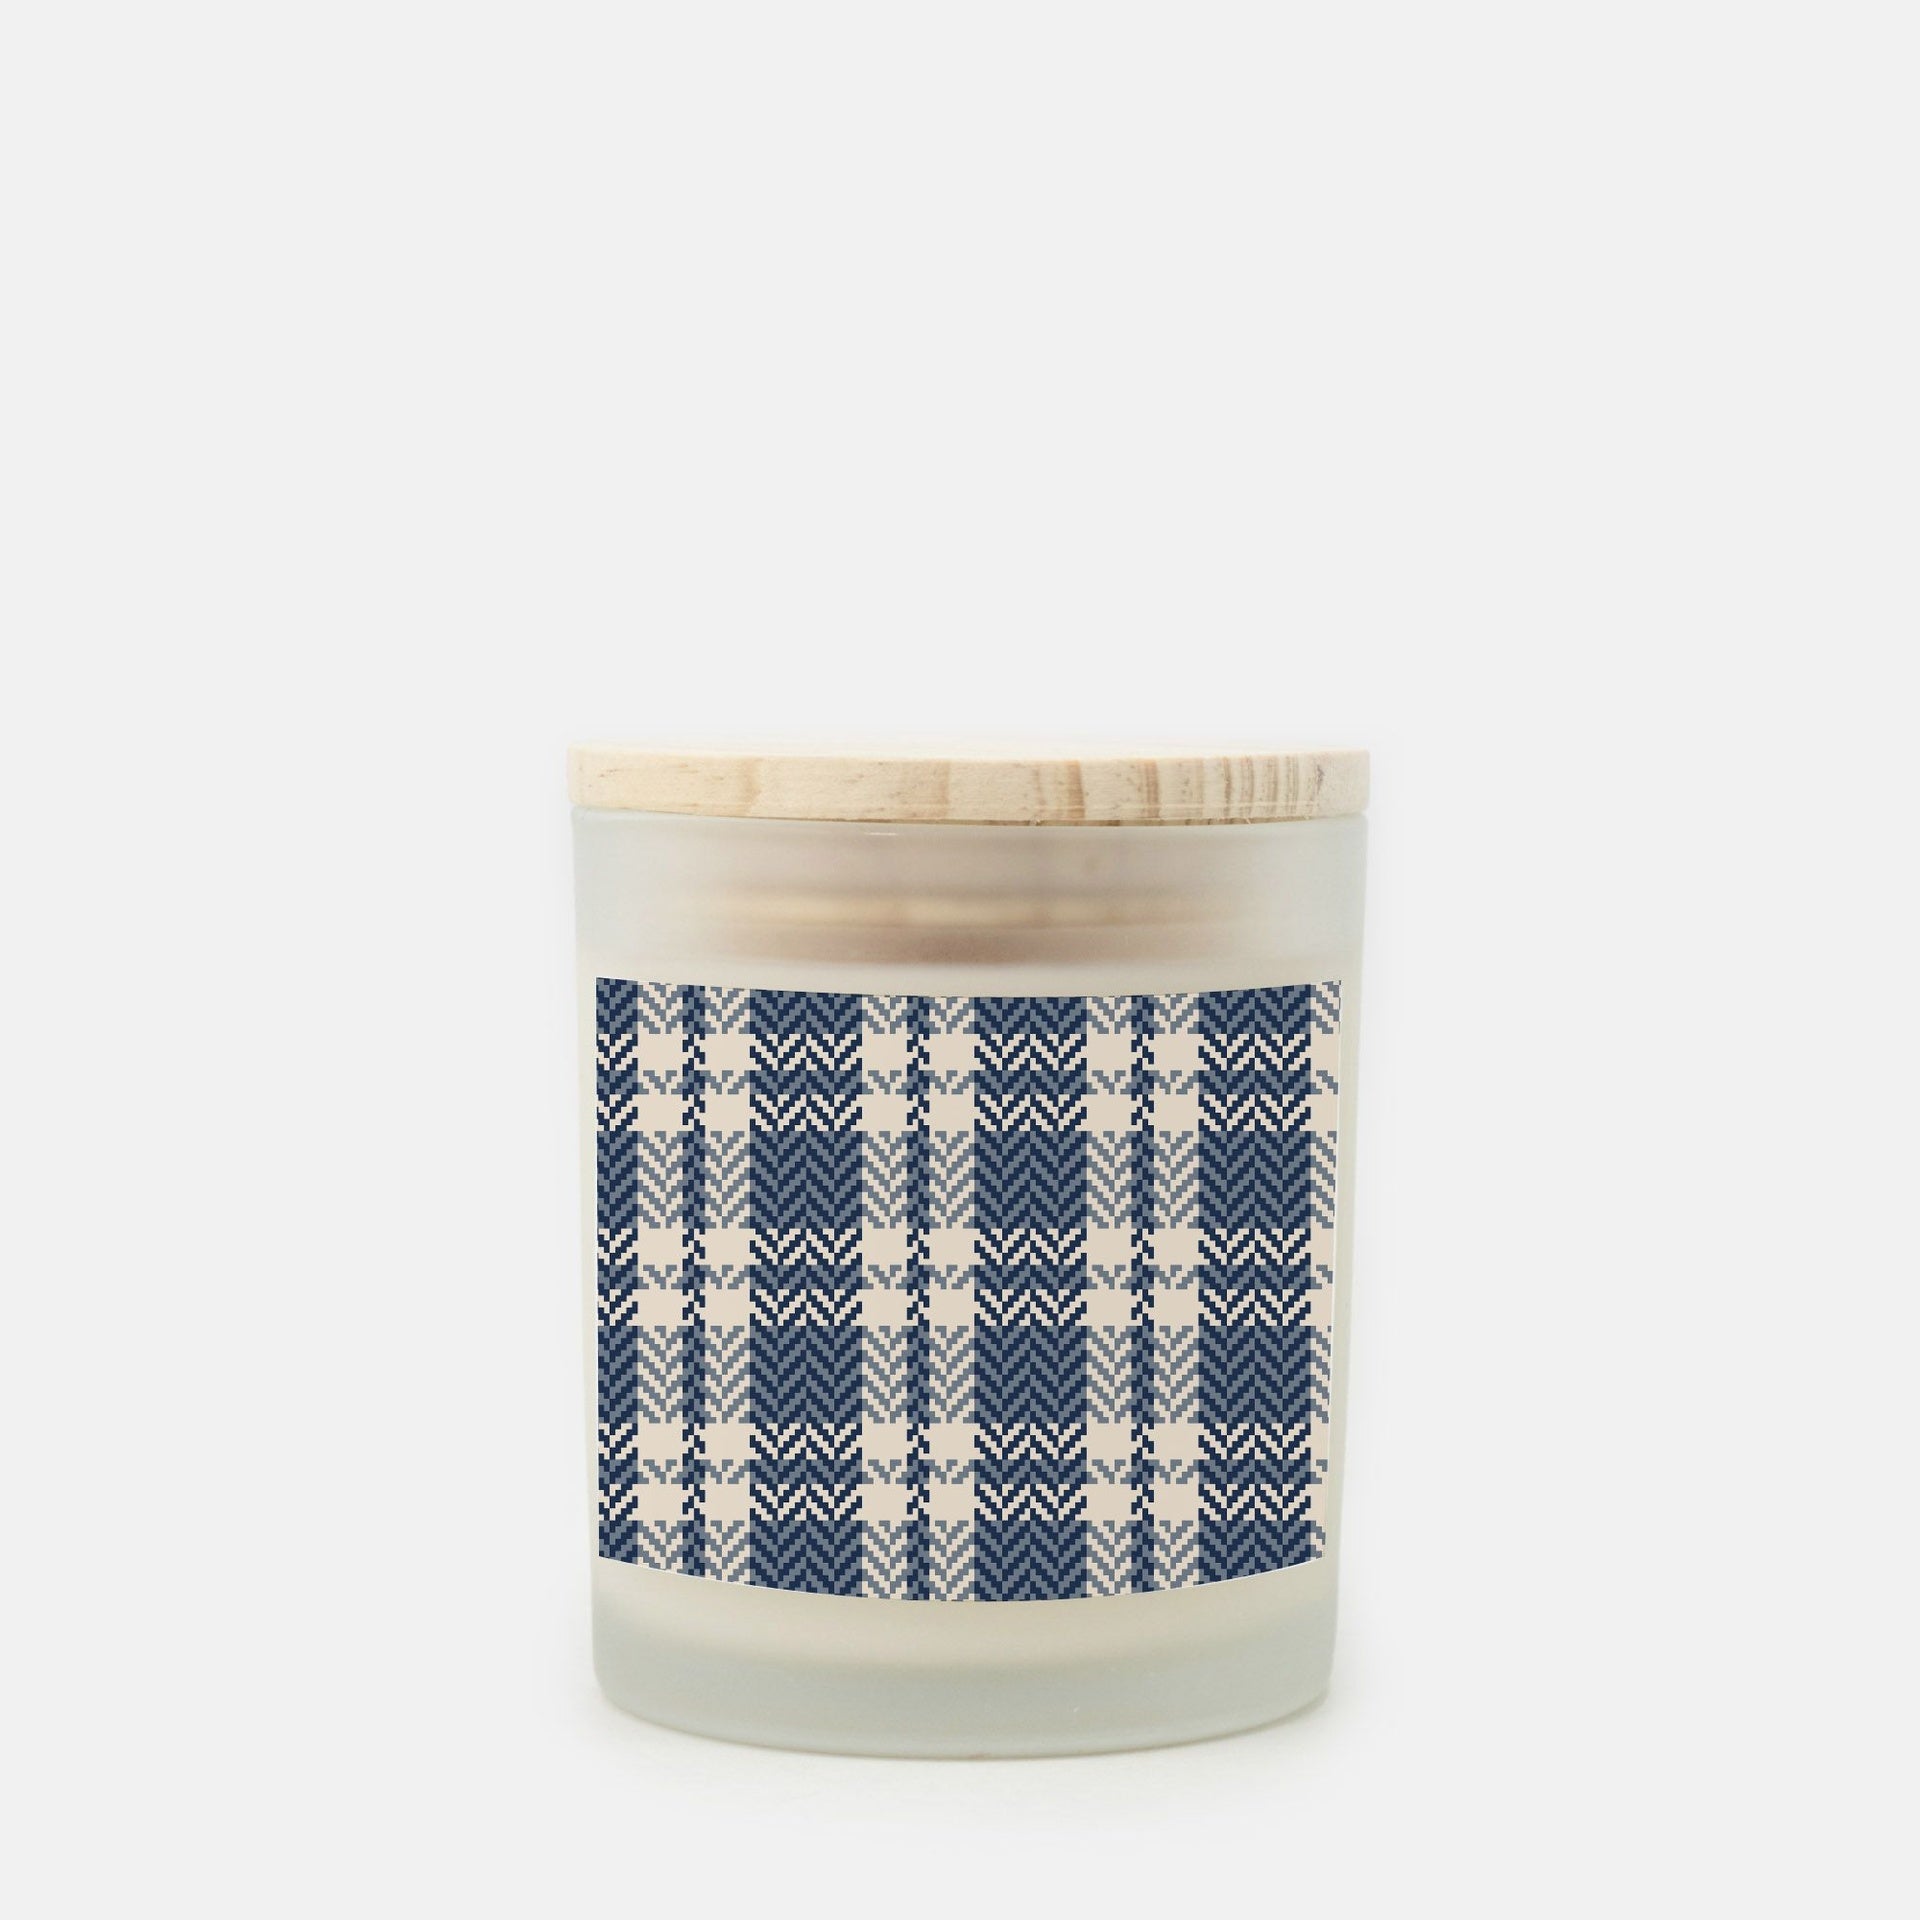 Lifestyle Details - 11oz Blue & Cream Plaid Frosted Glass Candle - Cashmere Vanilla